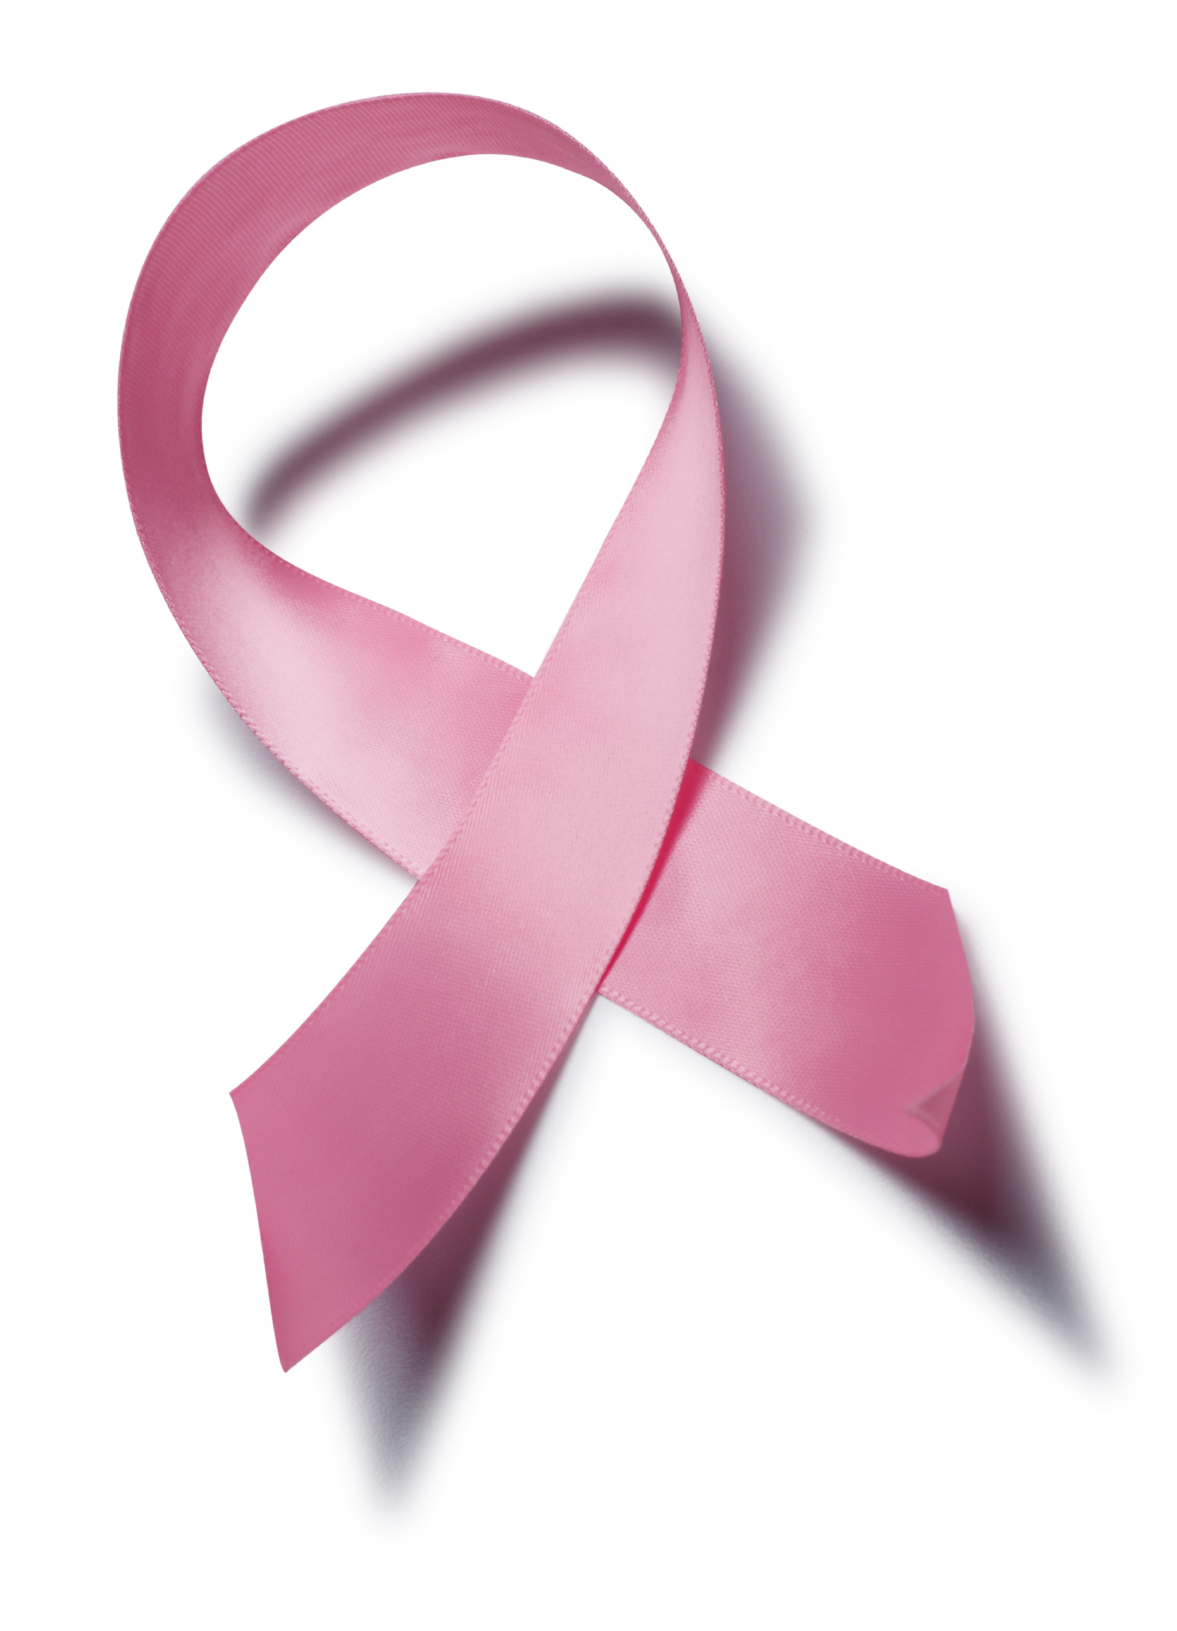 breast-cancer-ribbon | No Boobs About It